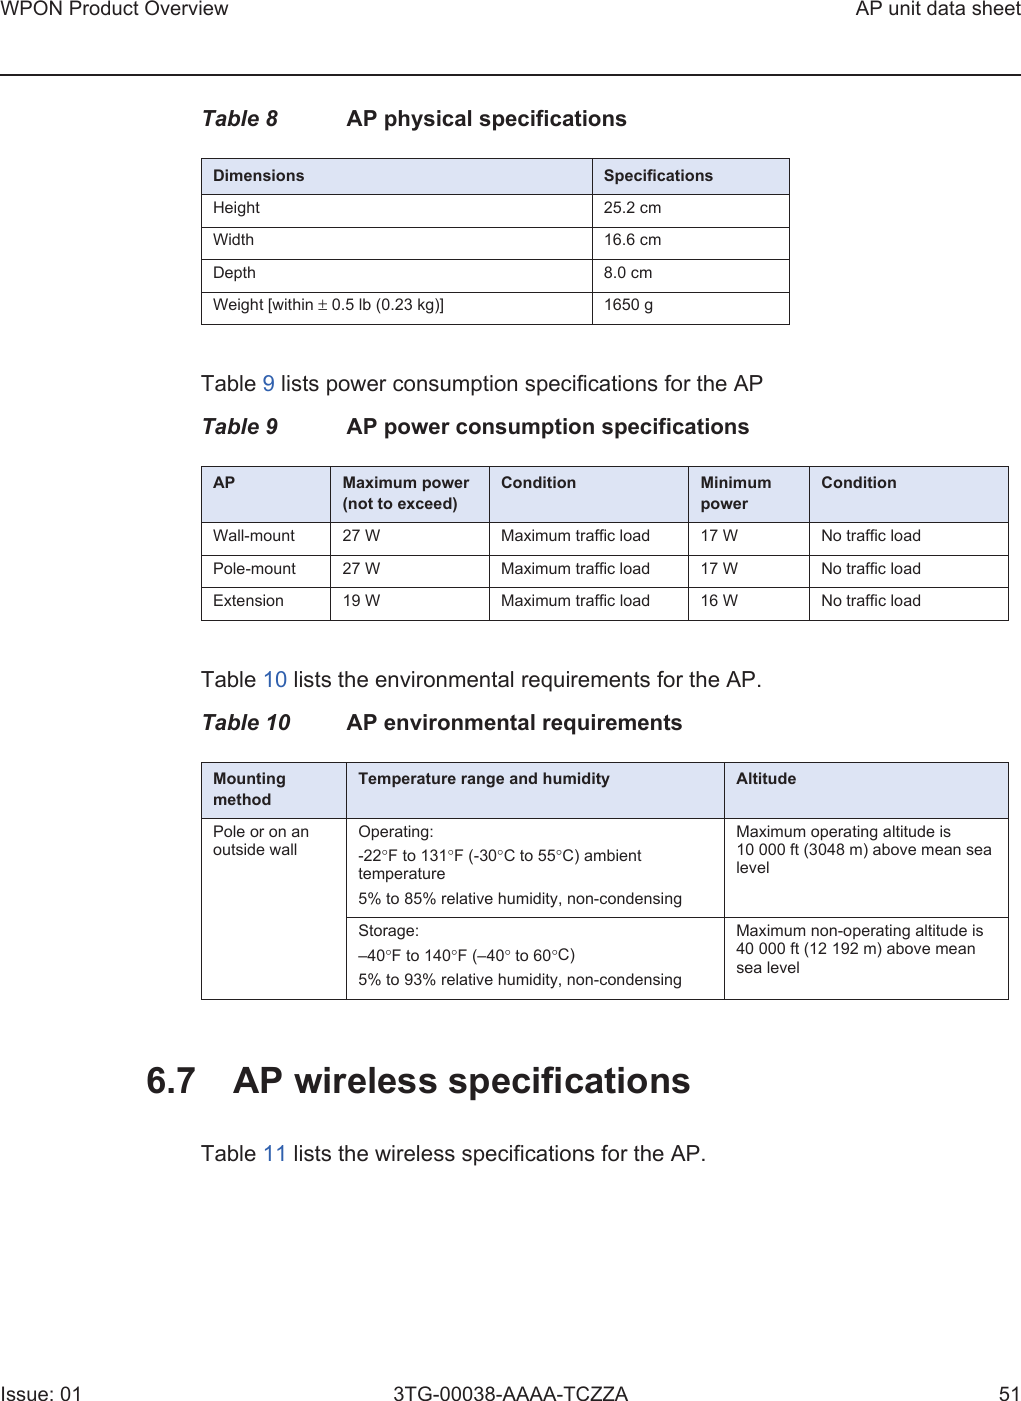 WPON Product Overview AP unit data sheetIssue: 01 3TG-00038-AAAA-TCZZA 51Table 8 AP physical specificationsTable 9 lists power consumption specifications for the APTable 9 AP power consumption specificationsTable 10 lists the environmental requirements for the AP.Table 10 AP environmental requirements6.7 AP wireless specificationsTable 11 lists the wireless specifications for the AP.Dimensions SpecificationsHeight 25.2 cmWidth 16.6 cmDepth 8.0 cmWeight [within ± 0.5 lb (0.23 kg)] 1650 gAP Maximum power (not to exceed)Condition Minimum powerConditionWall-mount 27 W Maximum traffic load 17 W No traffic loadPole-mount 27 W Maximum traffic load 17 W No traffic loadExtension 19 W Maximum traffic load 16 W No traffic loadMounting methodTemperature range and humidity AltitudePole or on an outside wallOperating:-22°F to 131°F (-30°C to 55°C) ambient temperature5% to 85% relative humidity, non-condensingMaximum operating altitude is 10 000 ft (3048 m) above mean sea levelStorage:–40°F to 140°F (–40° to 60°C)5% to 93% relative humidity, non-condensingMaximum non-operating altitude is 40 000 ft (12 192 m) above mean sea level 